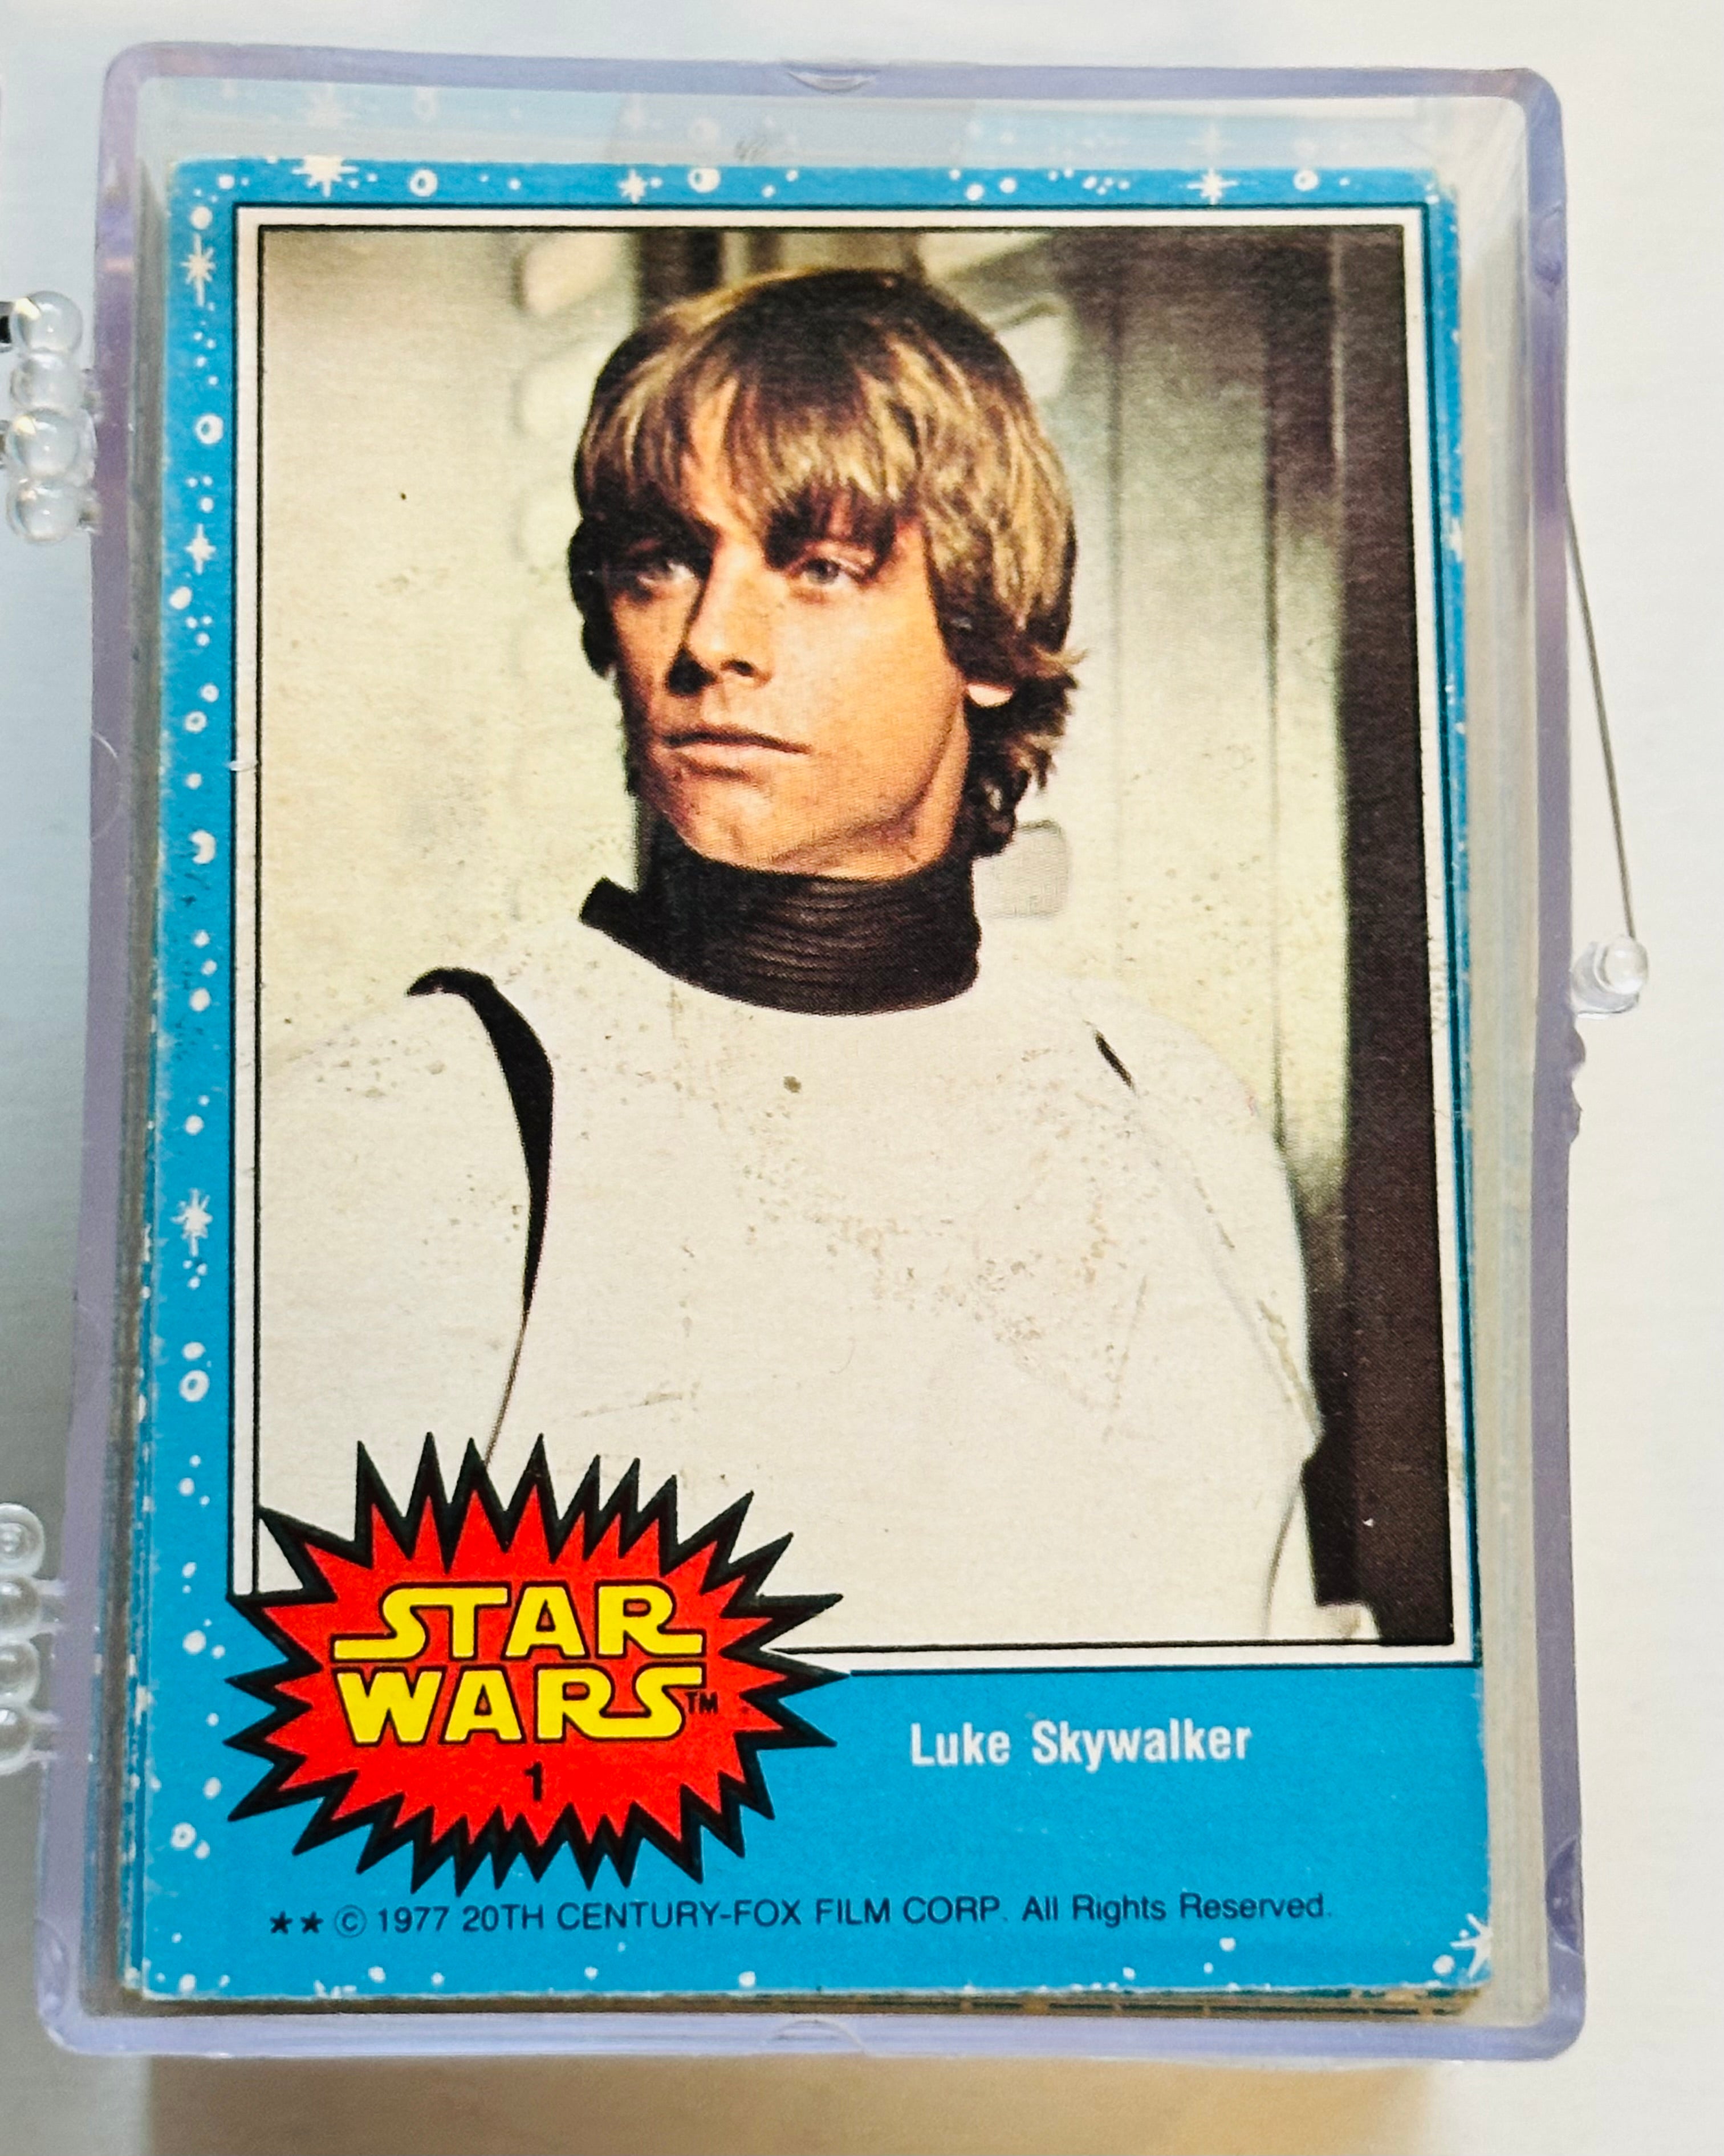 Star Wars series 1 Opc Canadian version cards and stickers set with Opc wrapper 1977